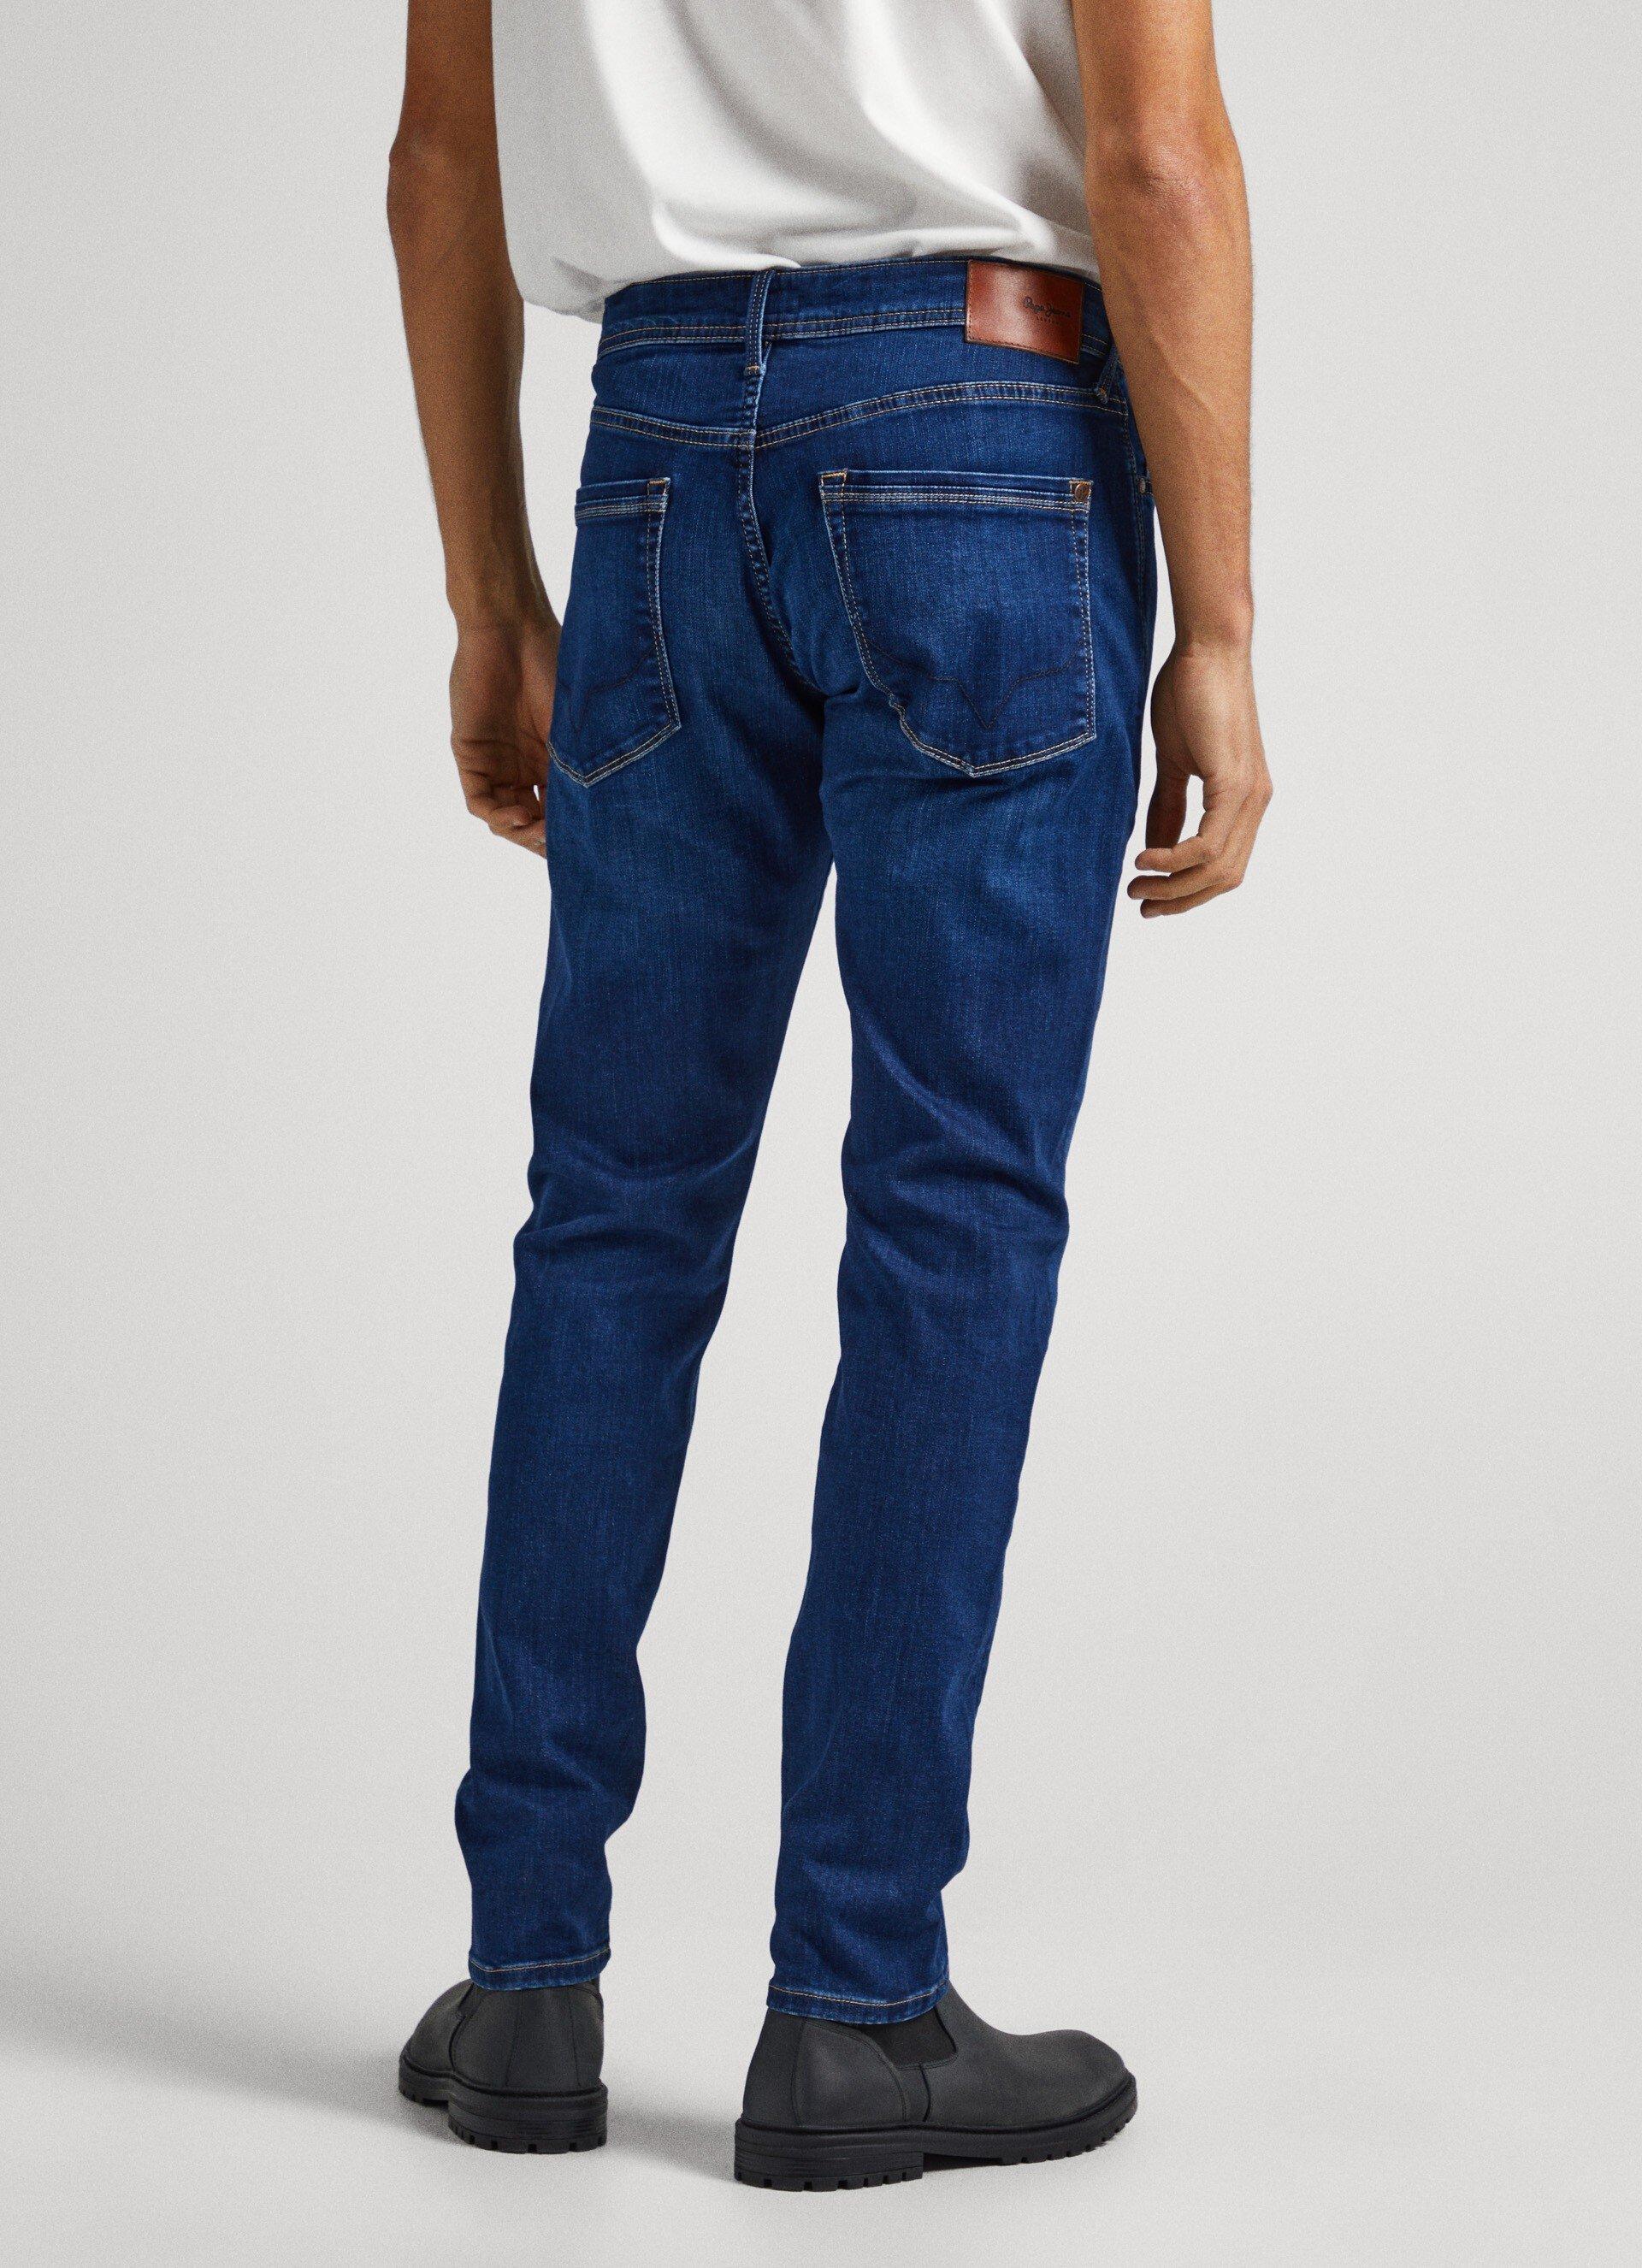 Pepe Jeans Stanley Chino Jeans, Slim Fit 